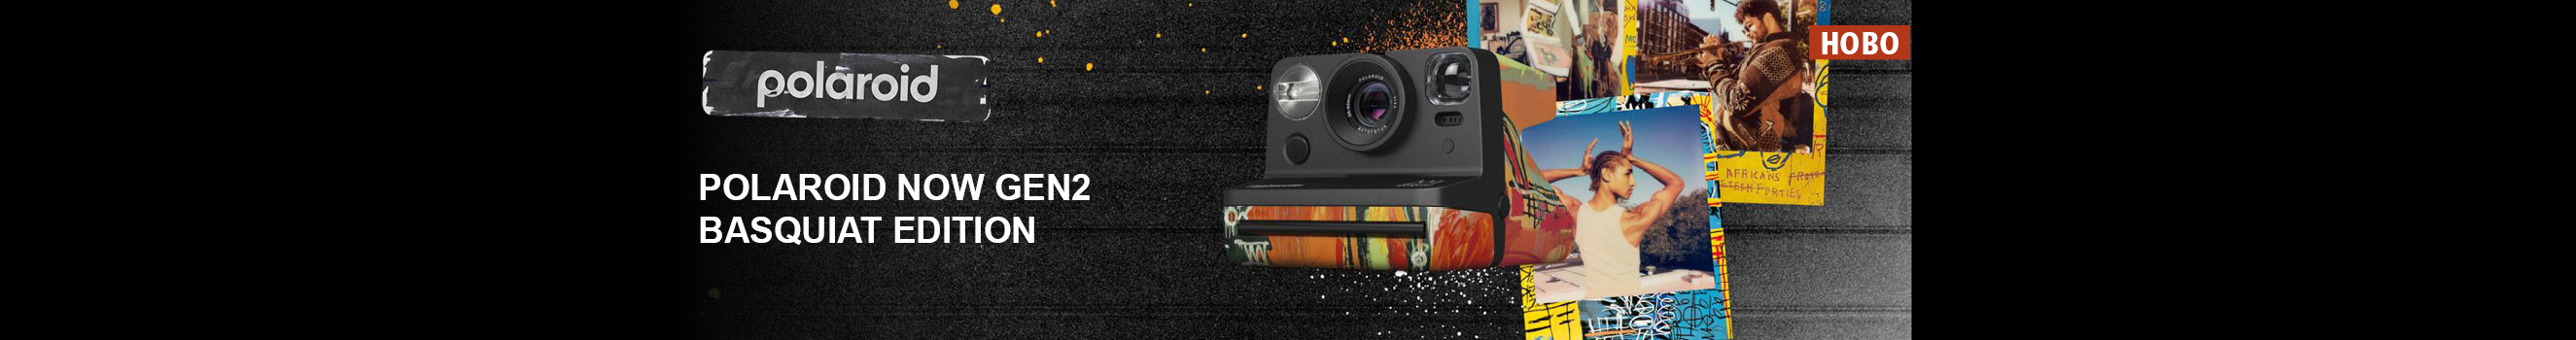  Meet the new Polaroid Now Gen 2 Basquiat Edition now with a gift photo film Polaroid i-Type Color Film Basquiat Edition